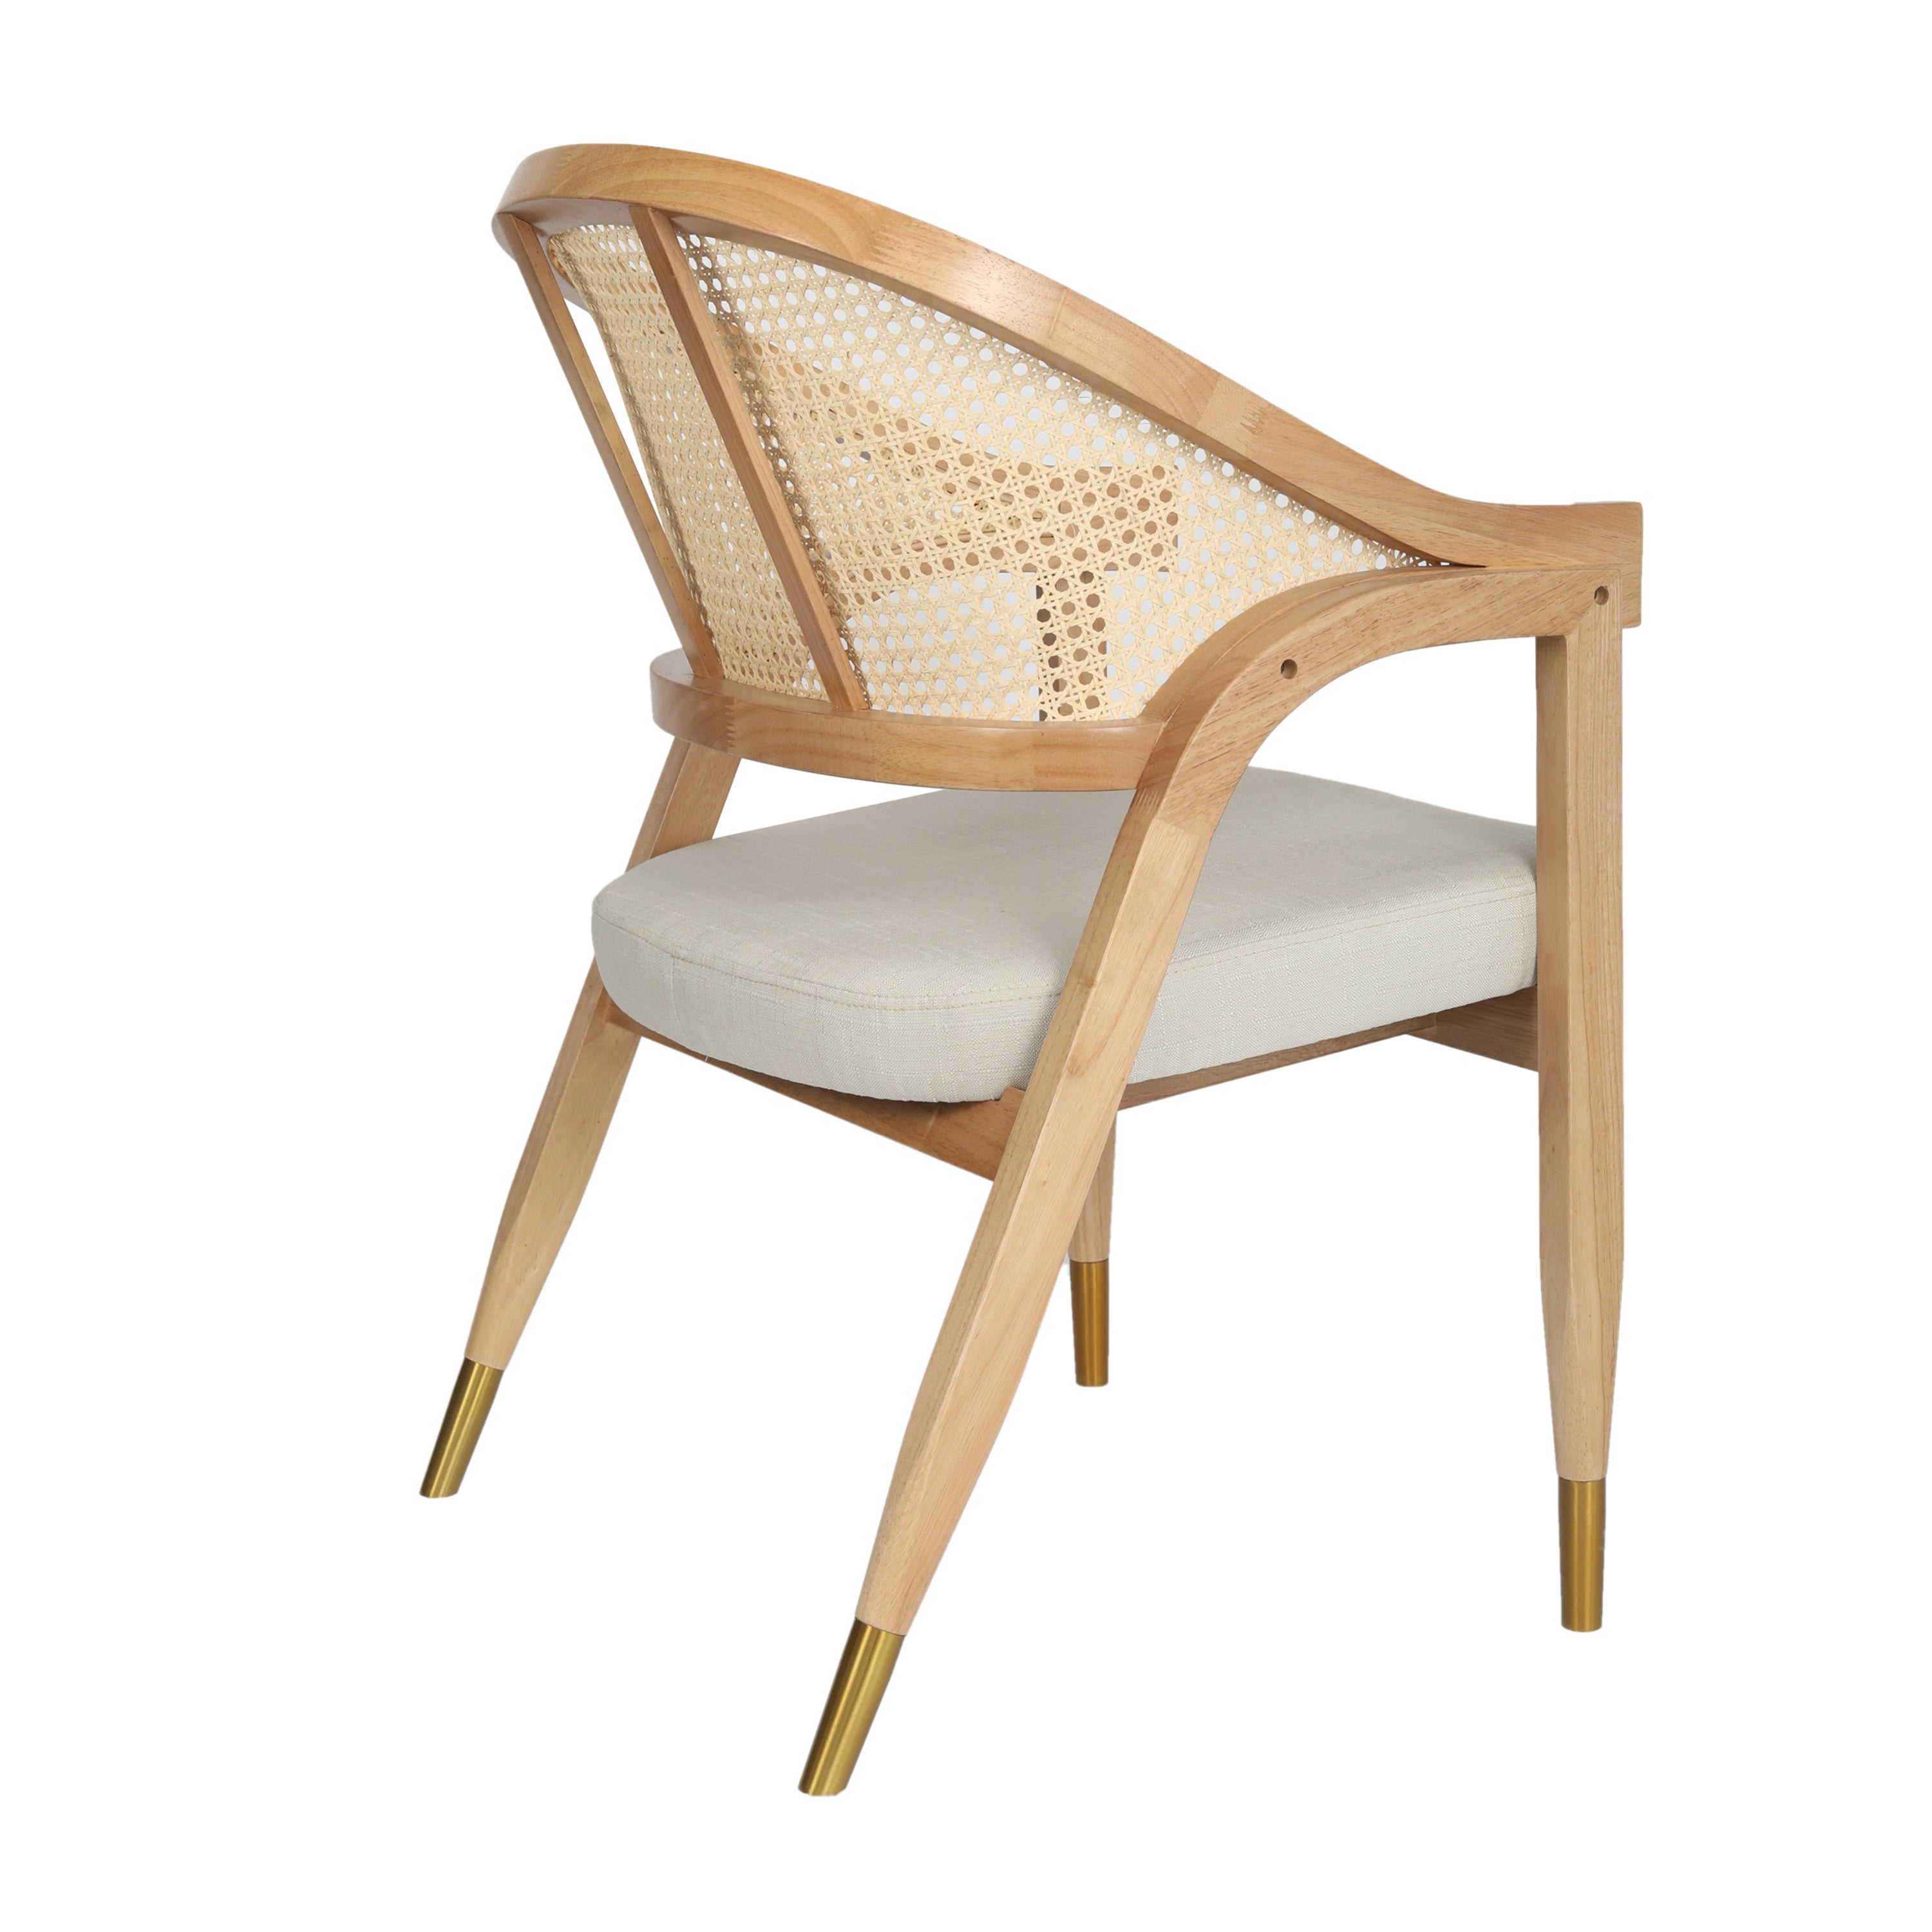 Naomi Commercial Cane Rattan Dining and Accent Chair with Solid Wood Frame Featuring Metallic Tipped Legs and Padded Seat-Accent Chair-Flash Furniture-Wall2Wall Furnishings